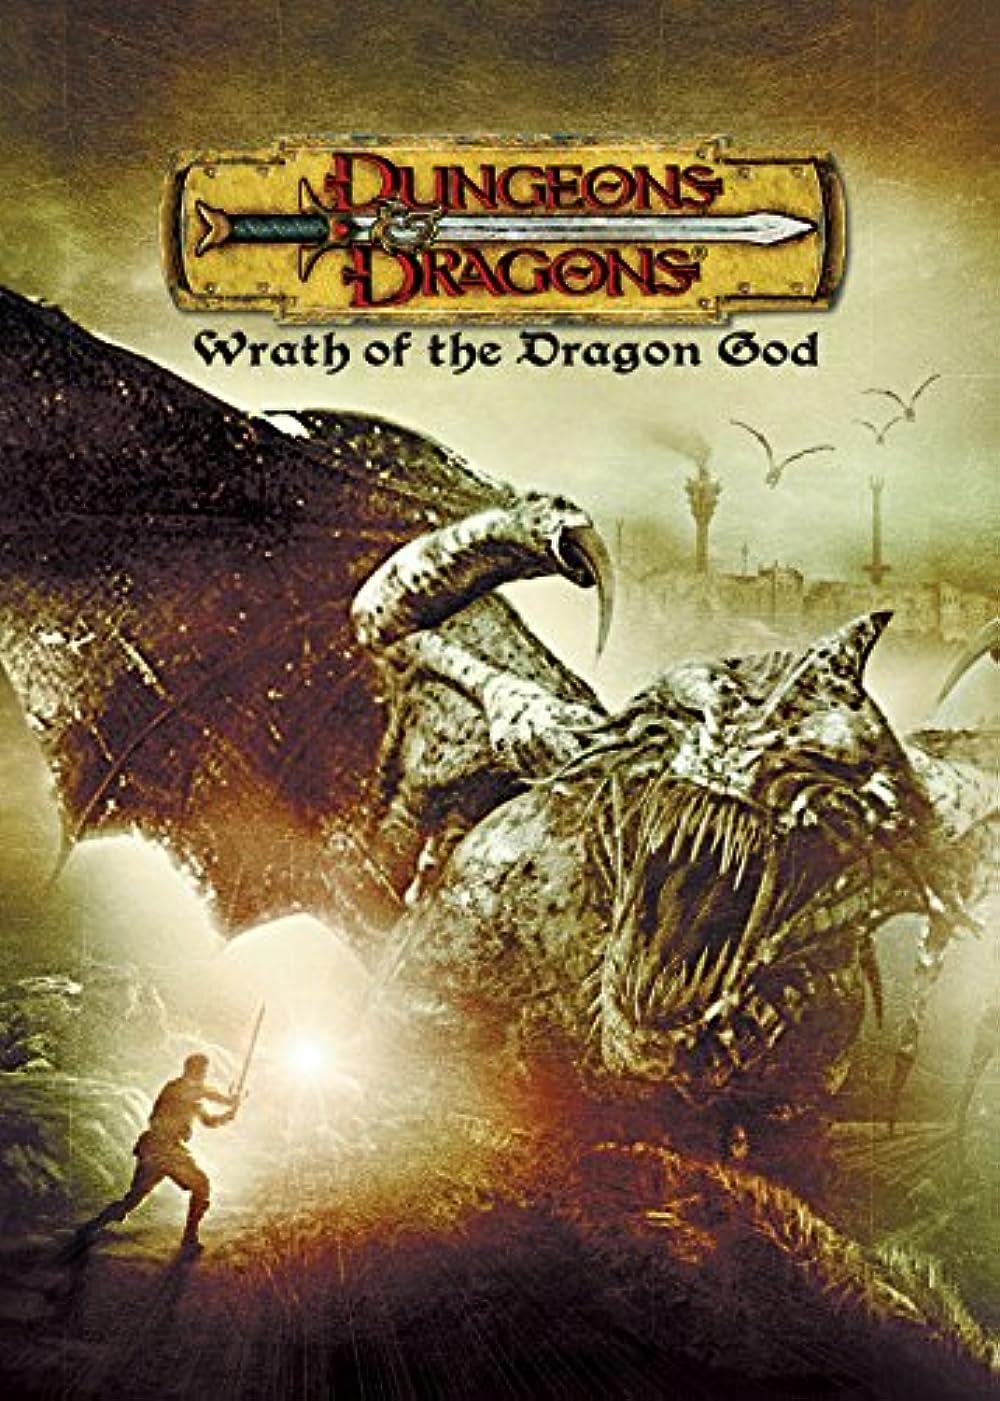 FULL MOVIE: Dungeons & Dragons: Wrath of the Dragon God (2005)